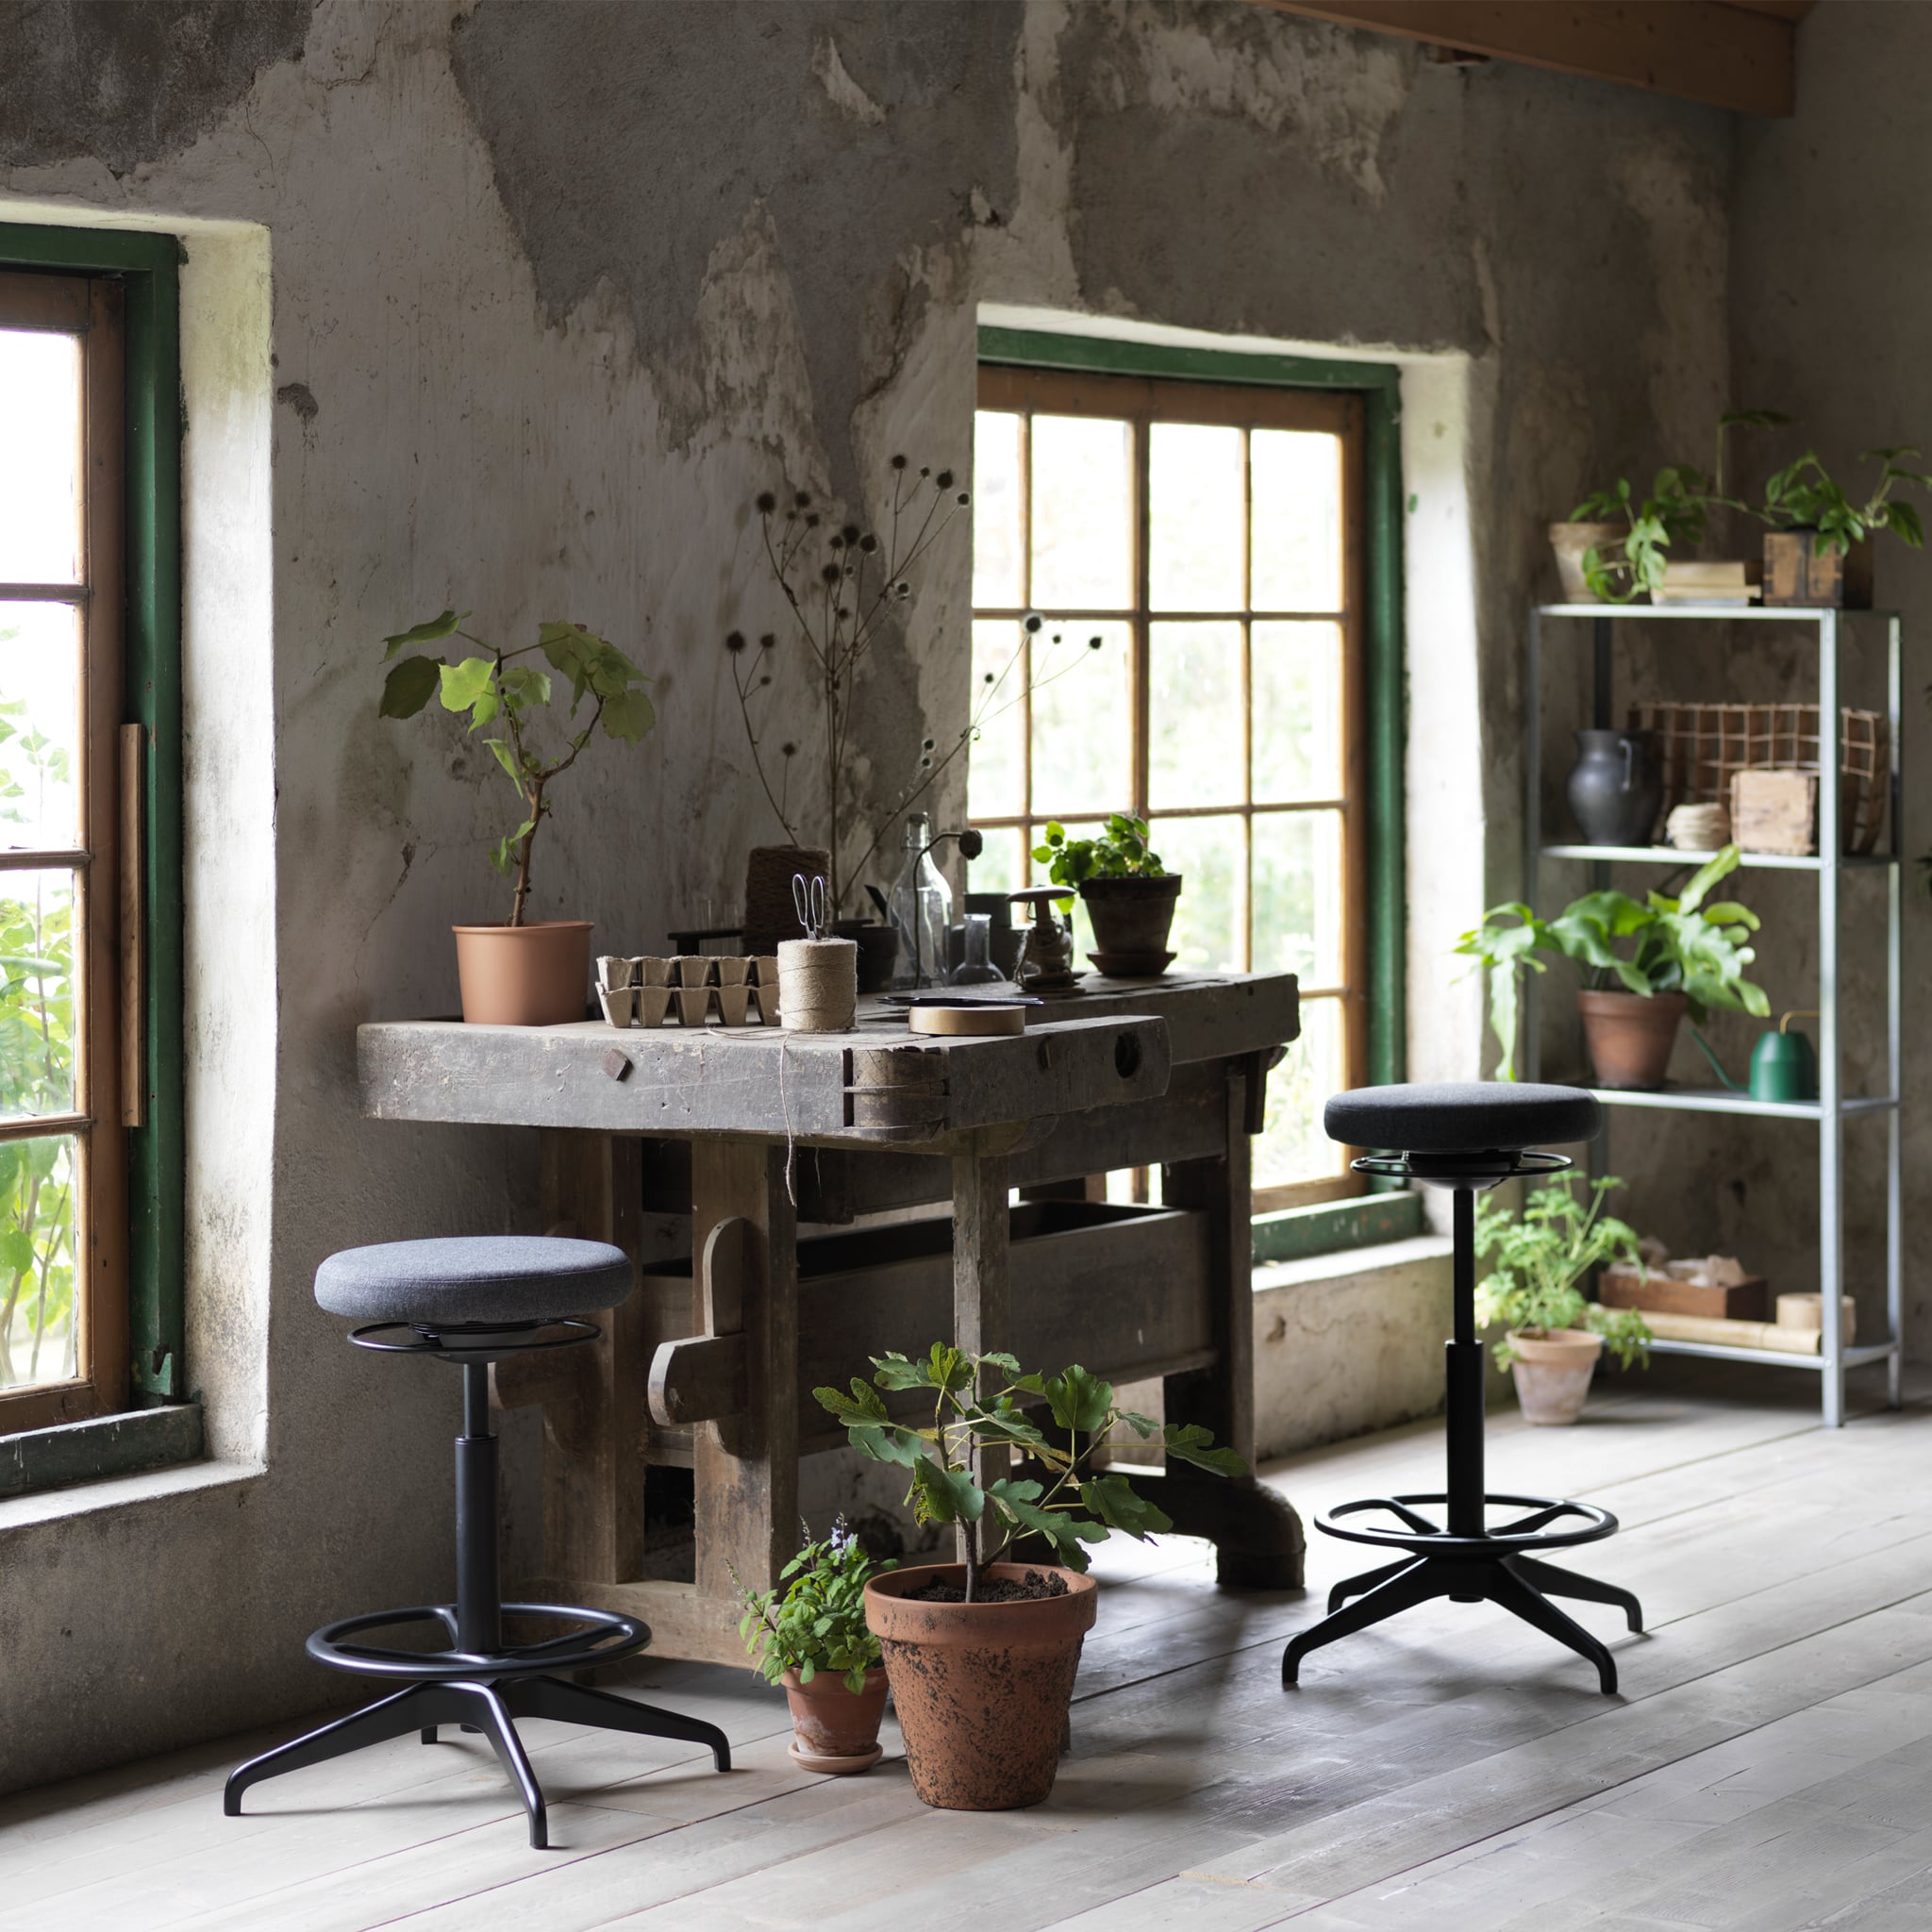 Two LIDKULLEN active sit/stand supports in dark grey placed in a gardener’s workspace surrounded with plants.